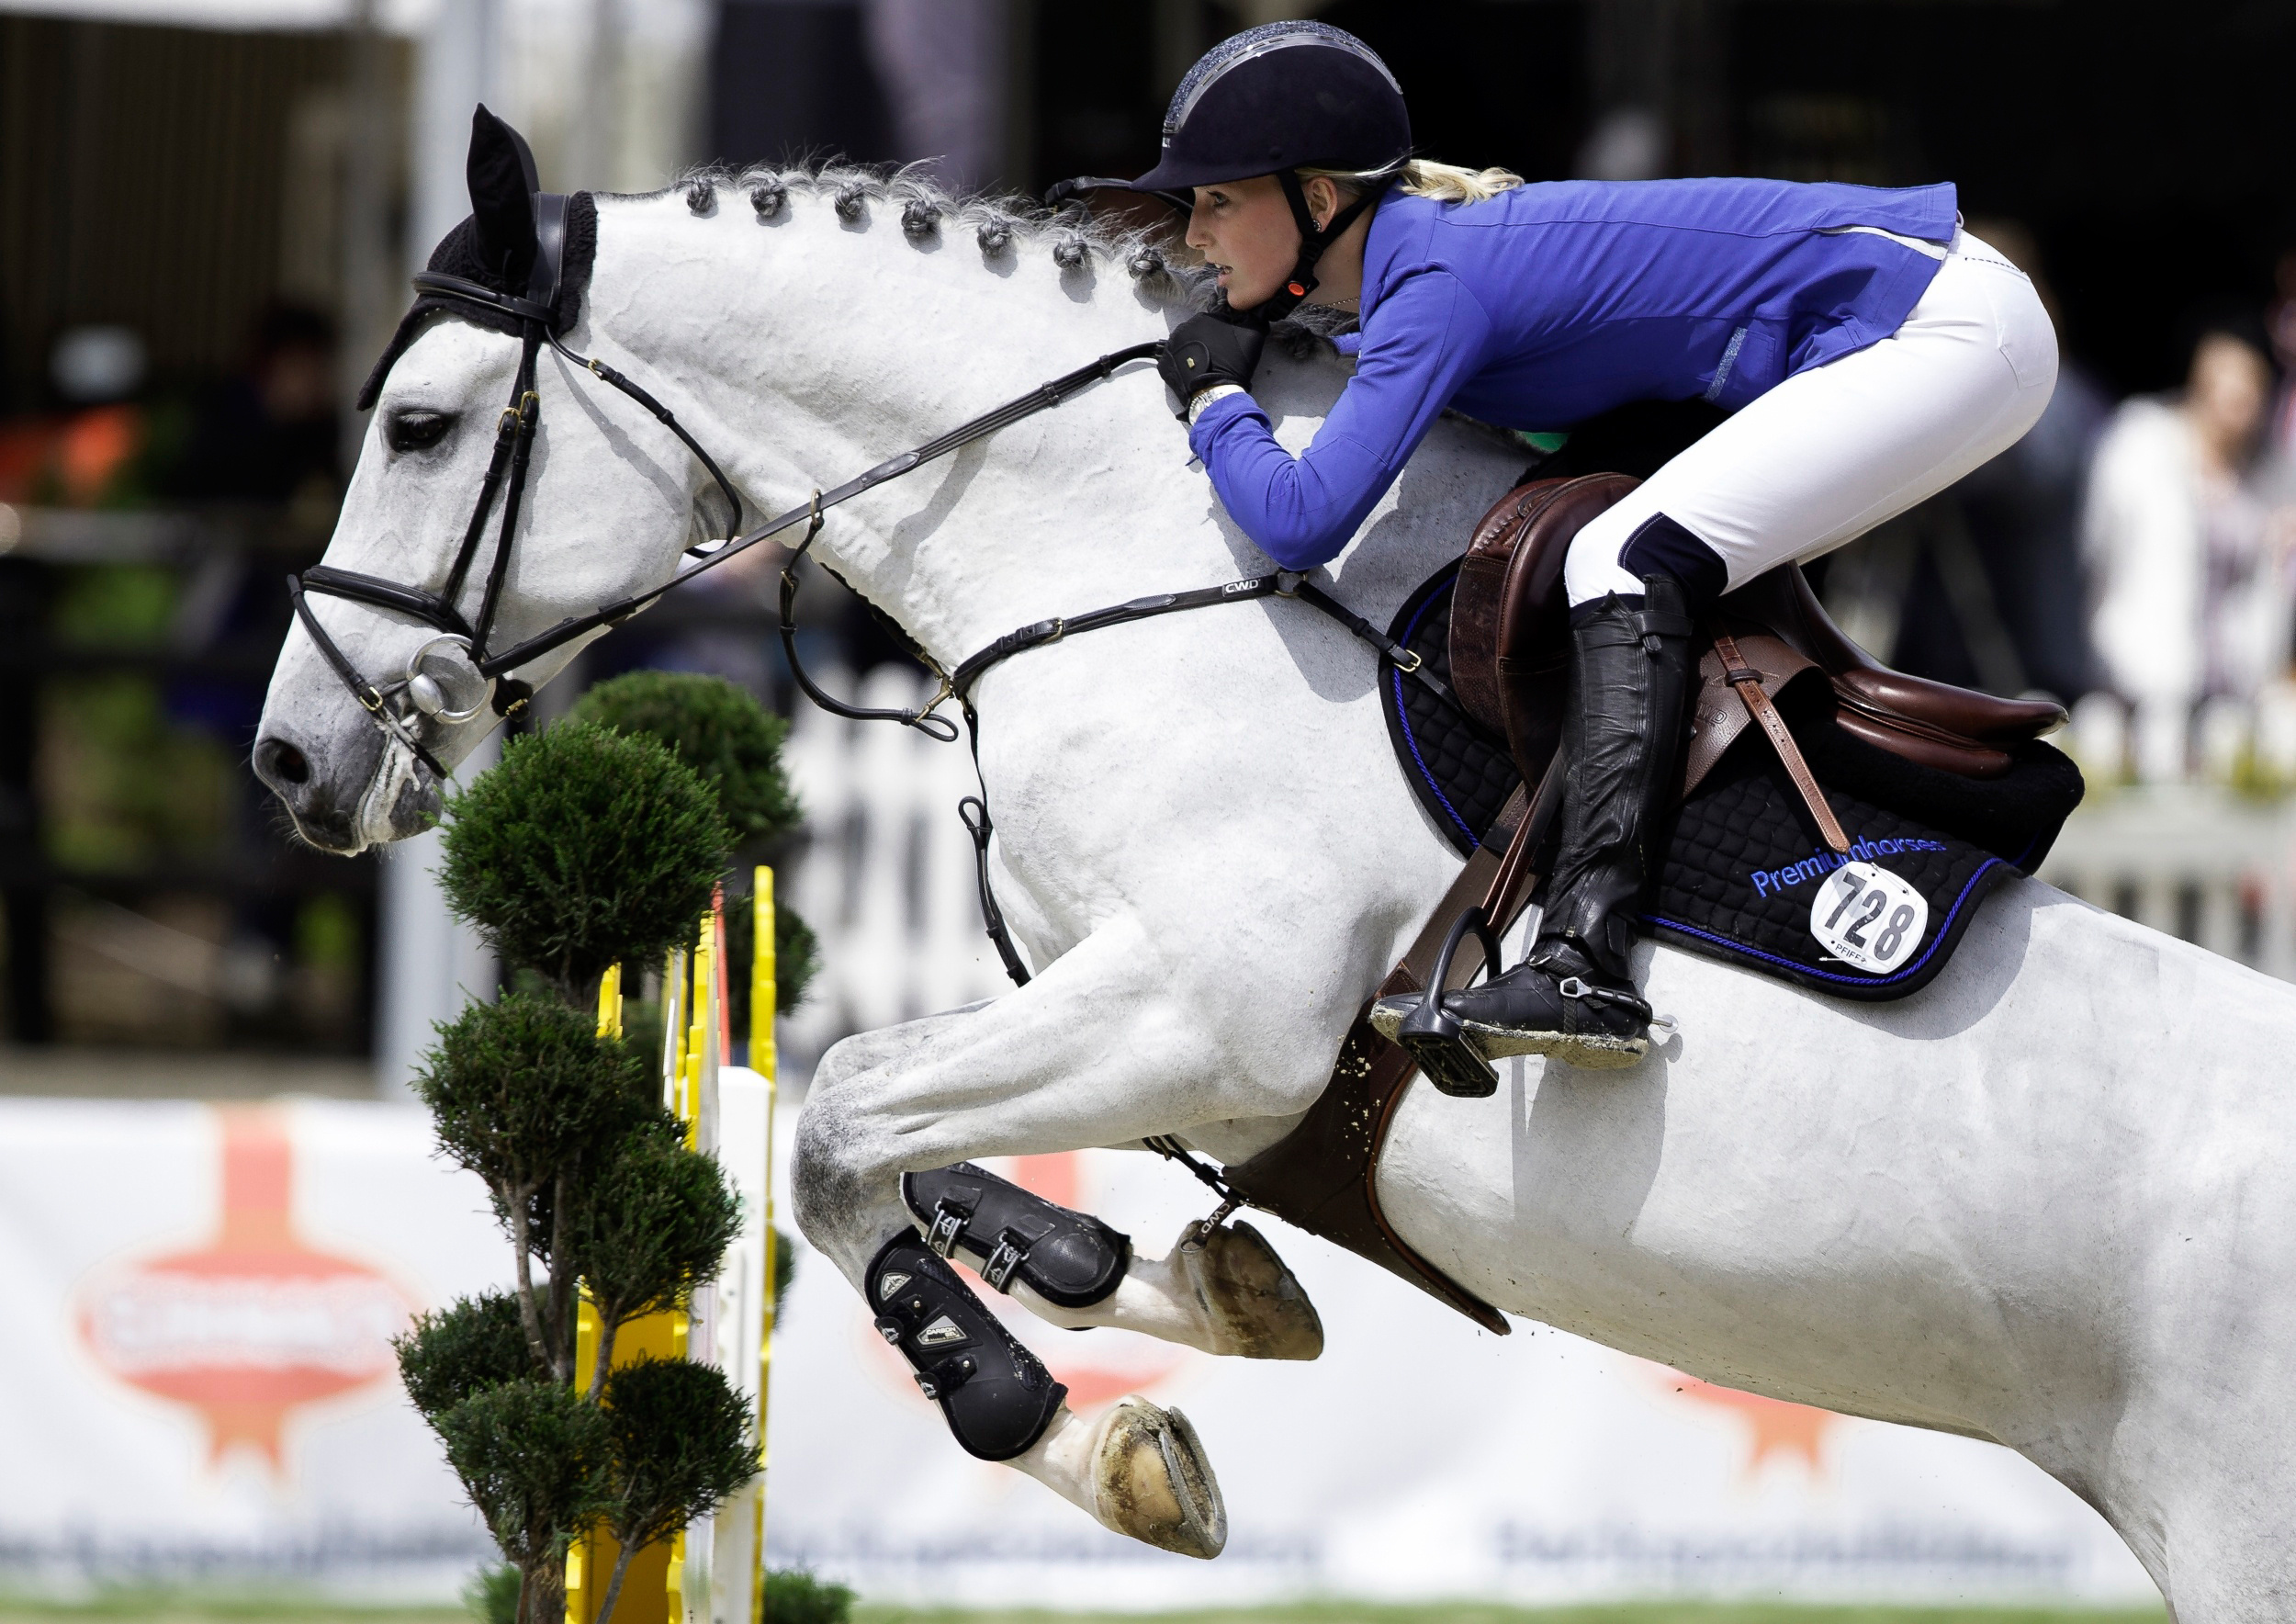 Equitation: Show jumping, Official Olympic sport and a popular outdoor recreational activity. 2500x1770 HD Background.